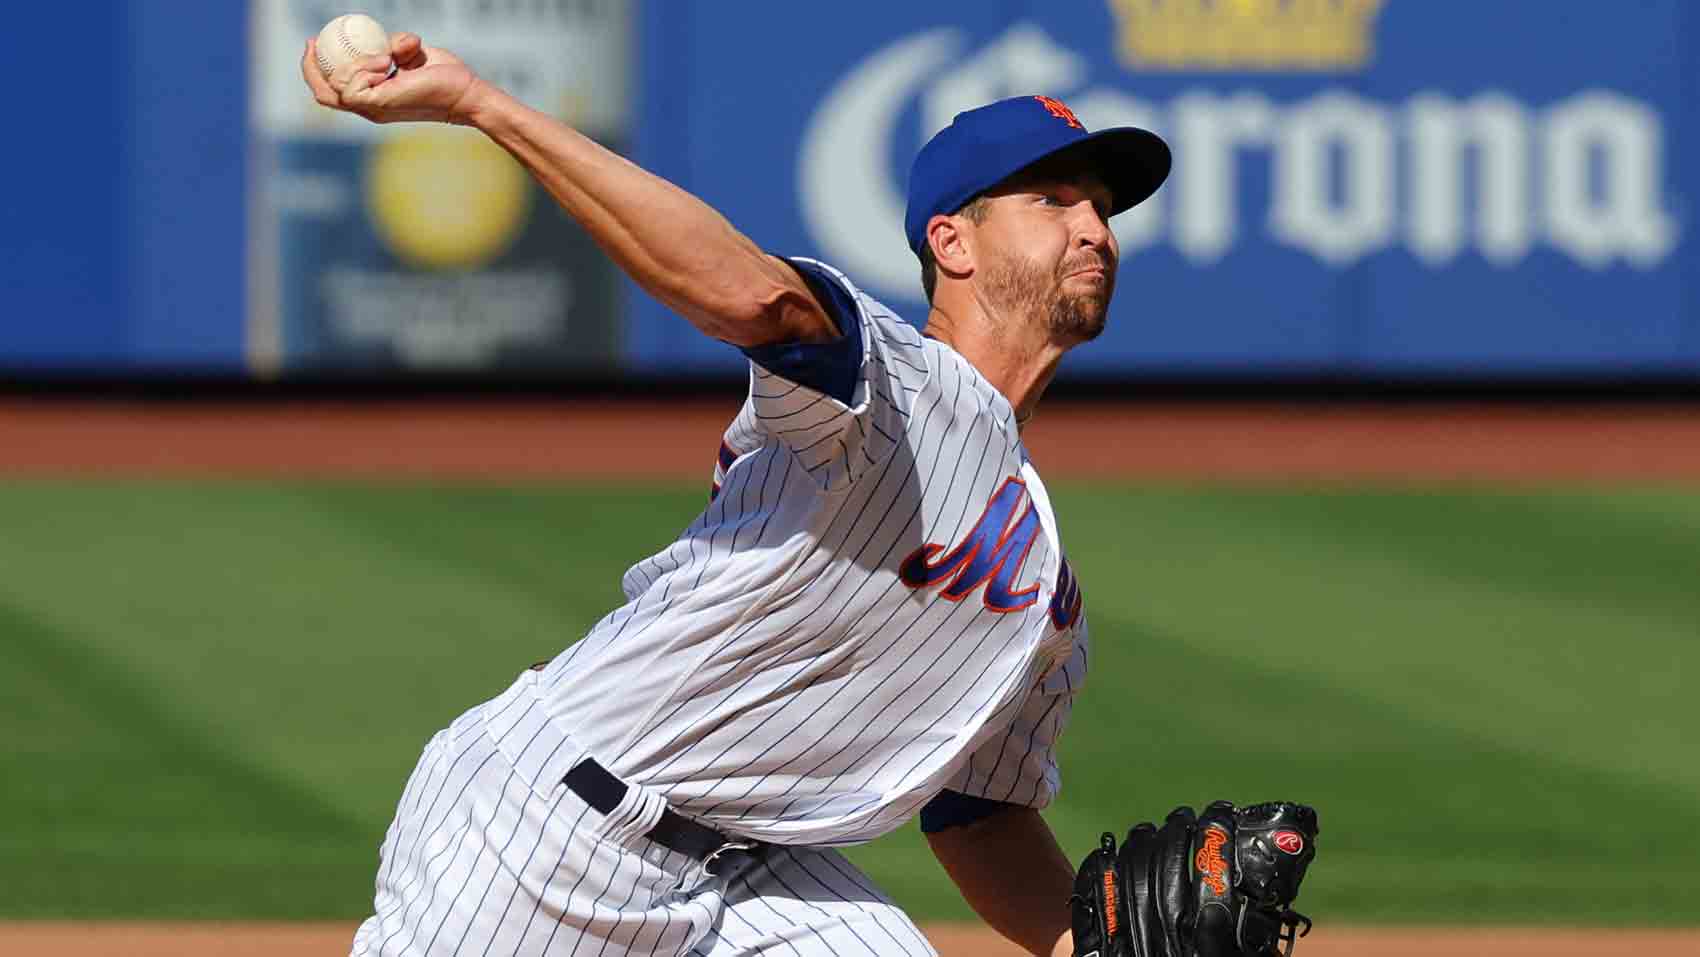 Jacob deGrom strikes out 8 straight to begin game, strengthens